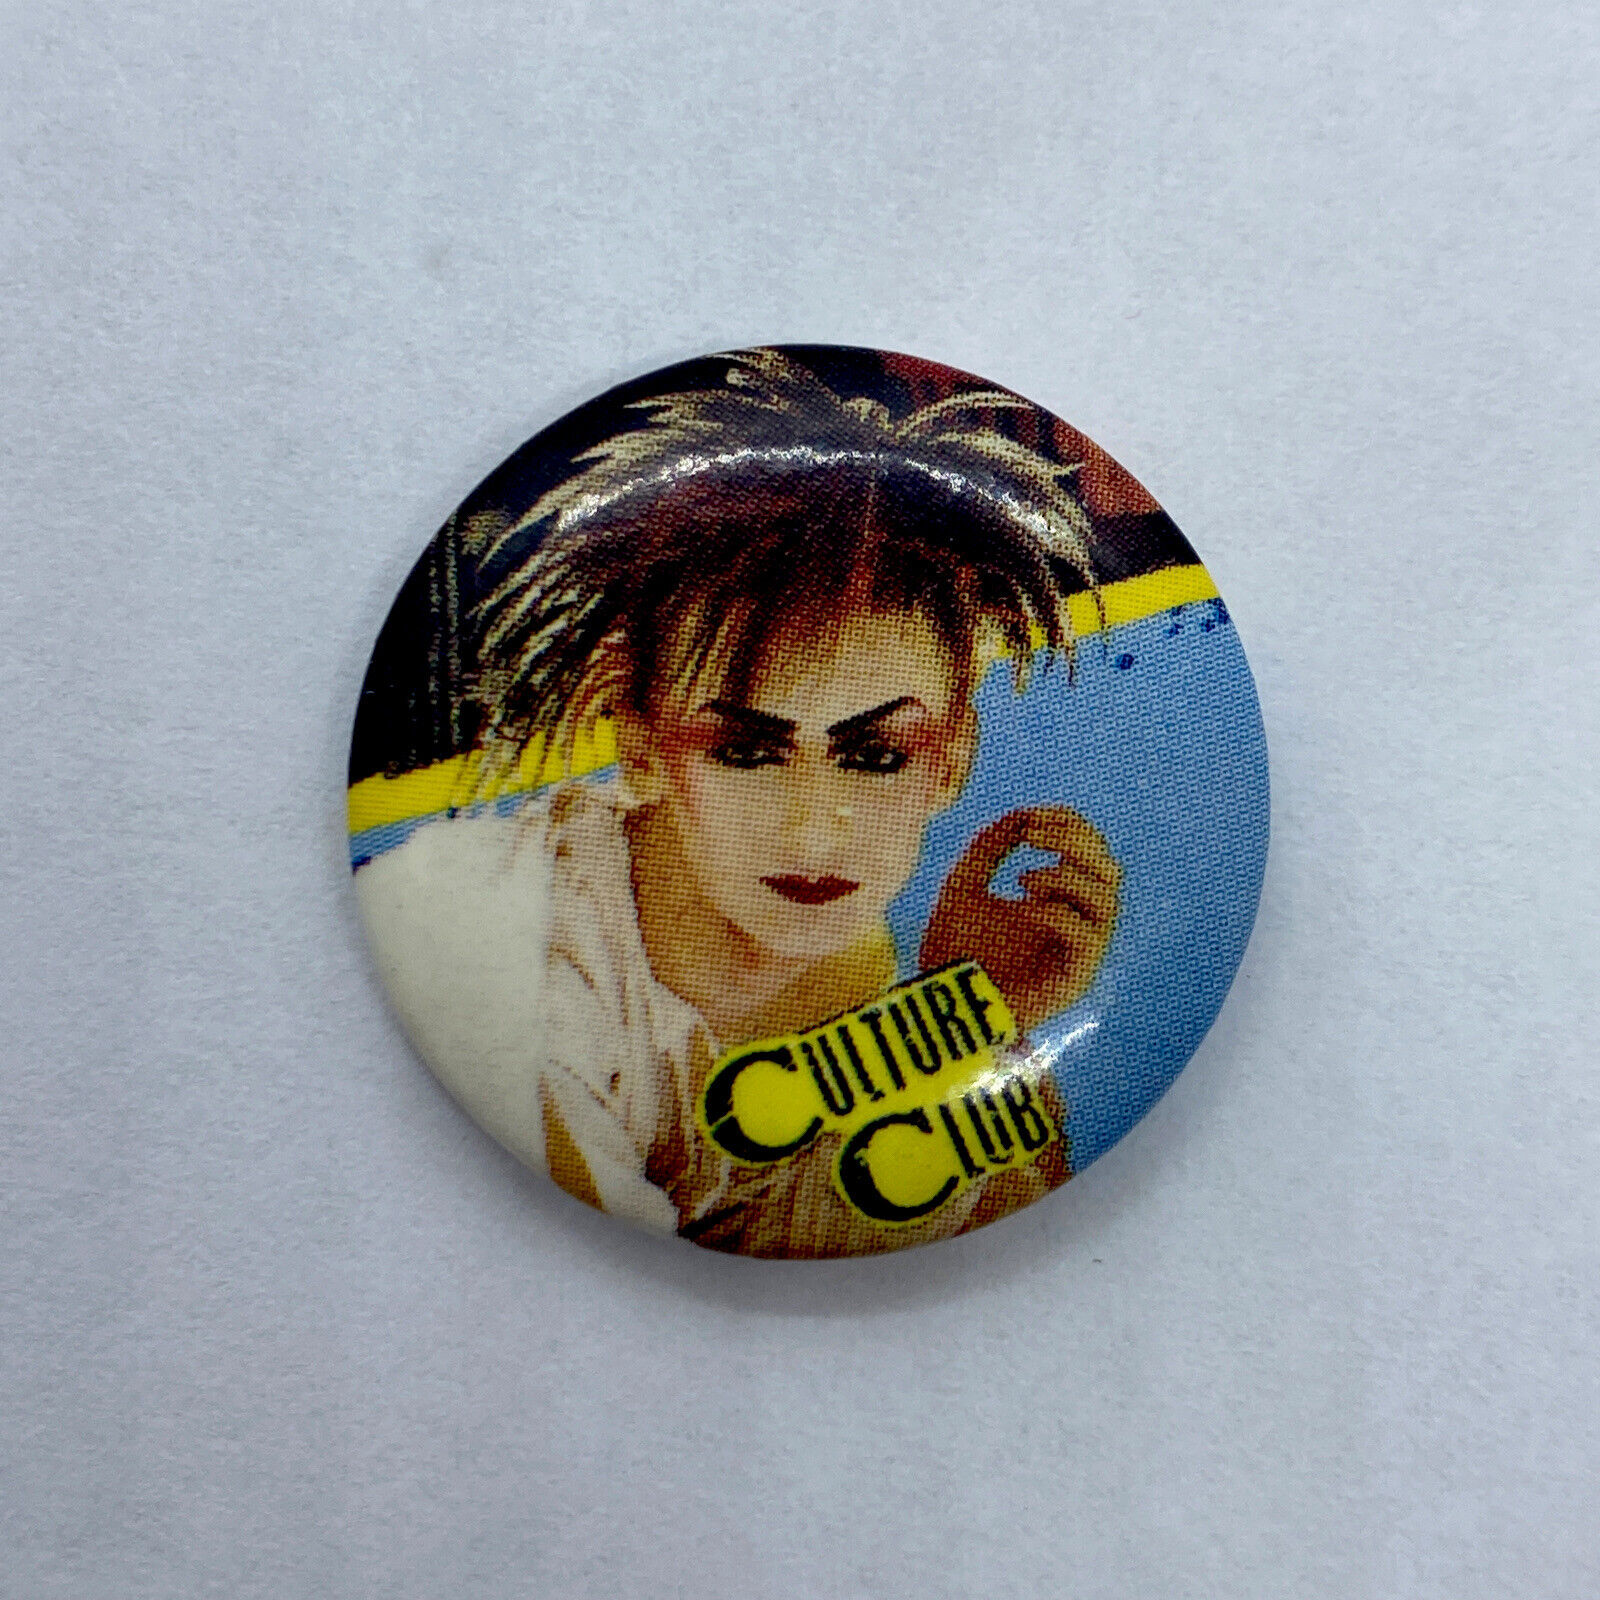 Vintage 1984 LICENSED Boy George Culture Club Button Pin Pinback Lithograph